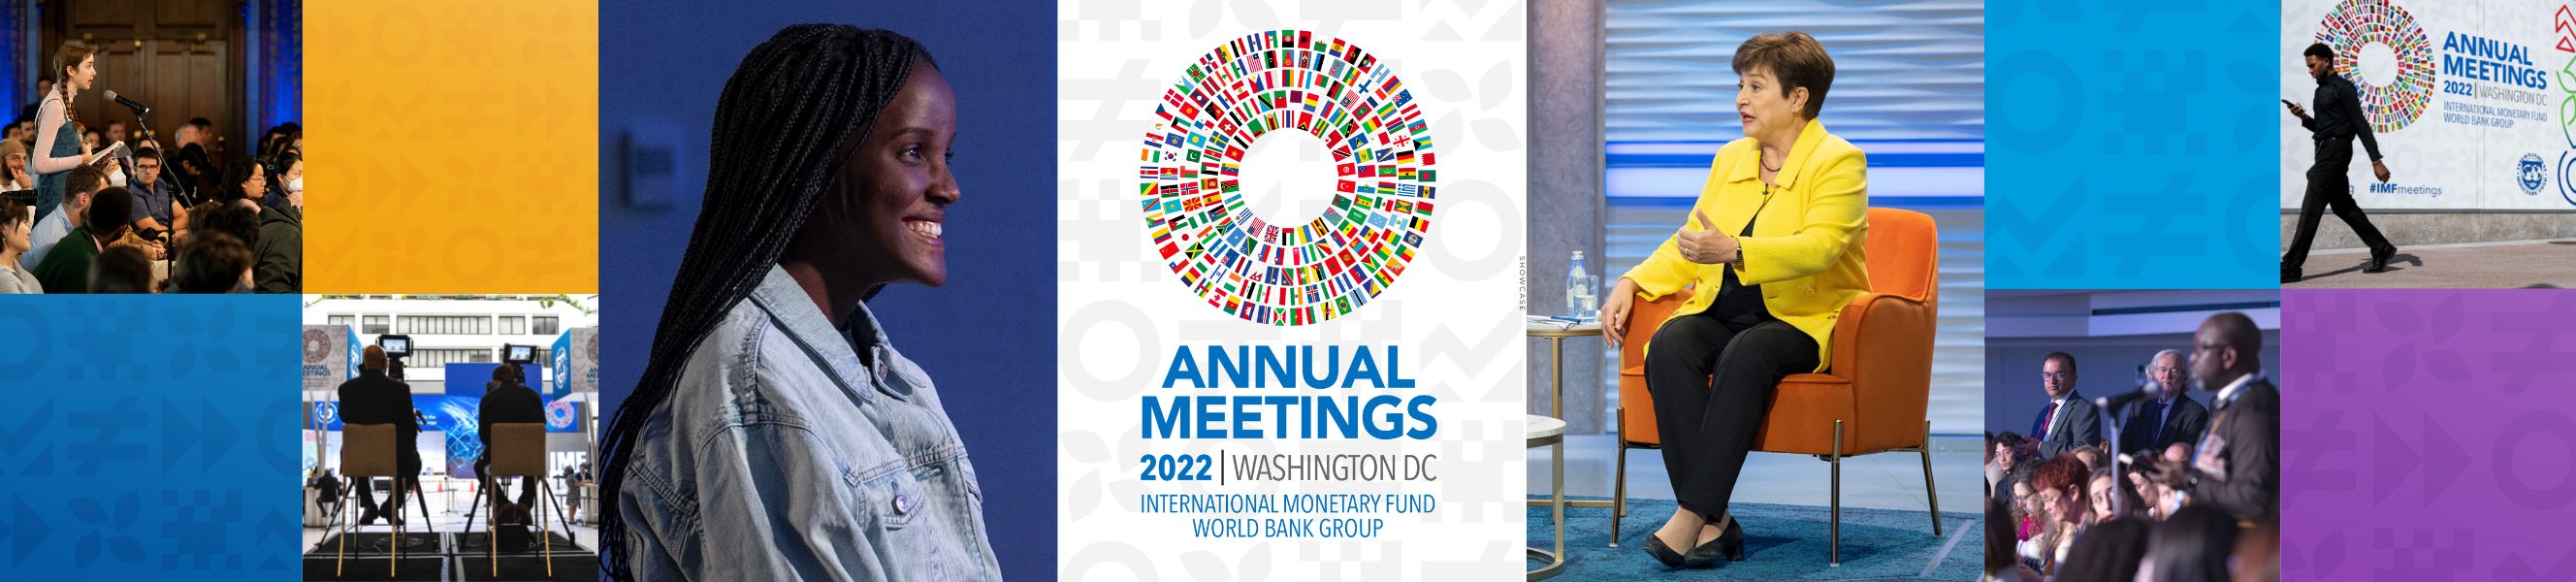 IMF Annual Meetings 2022 DAY 1